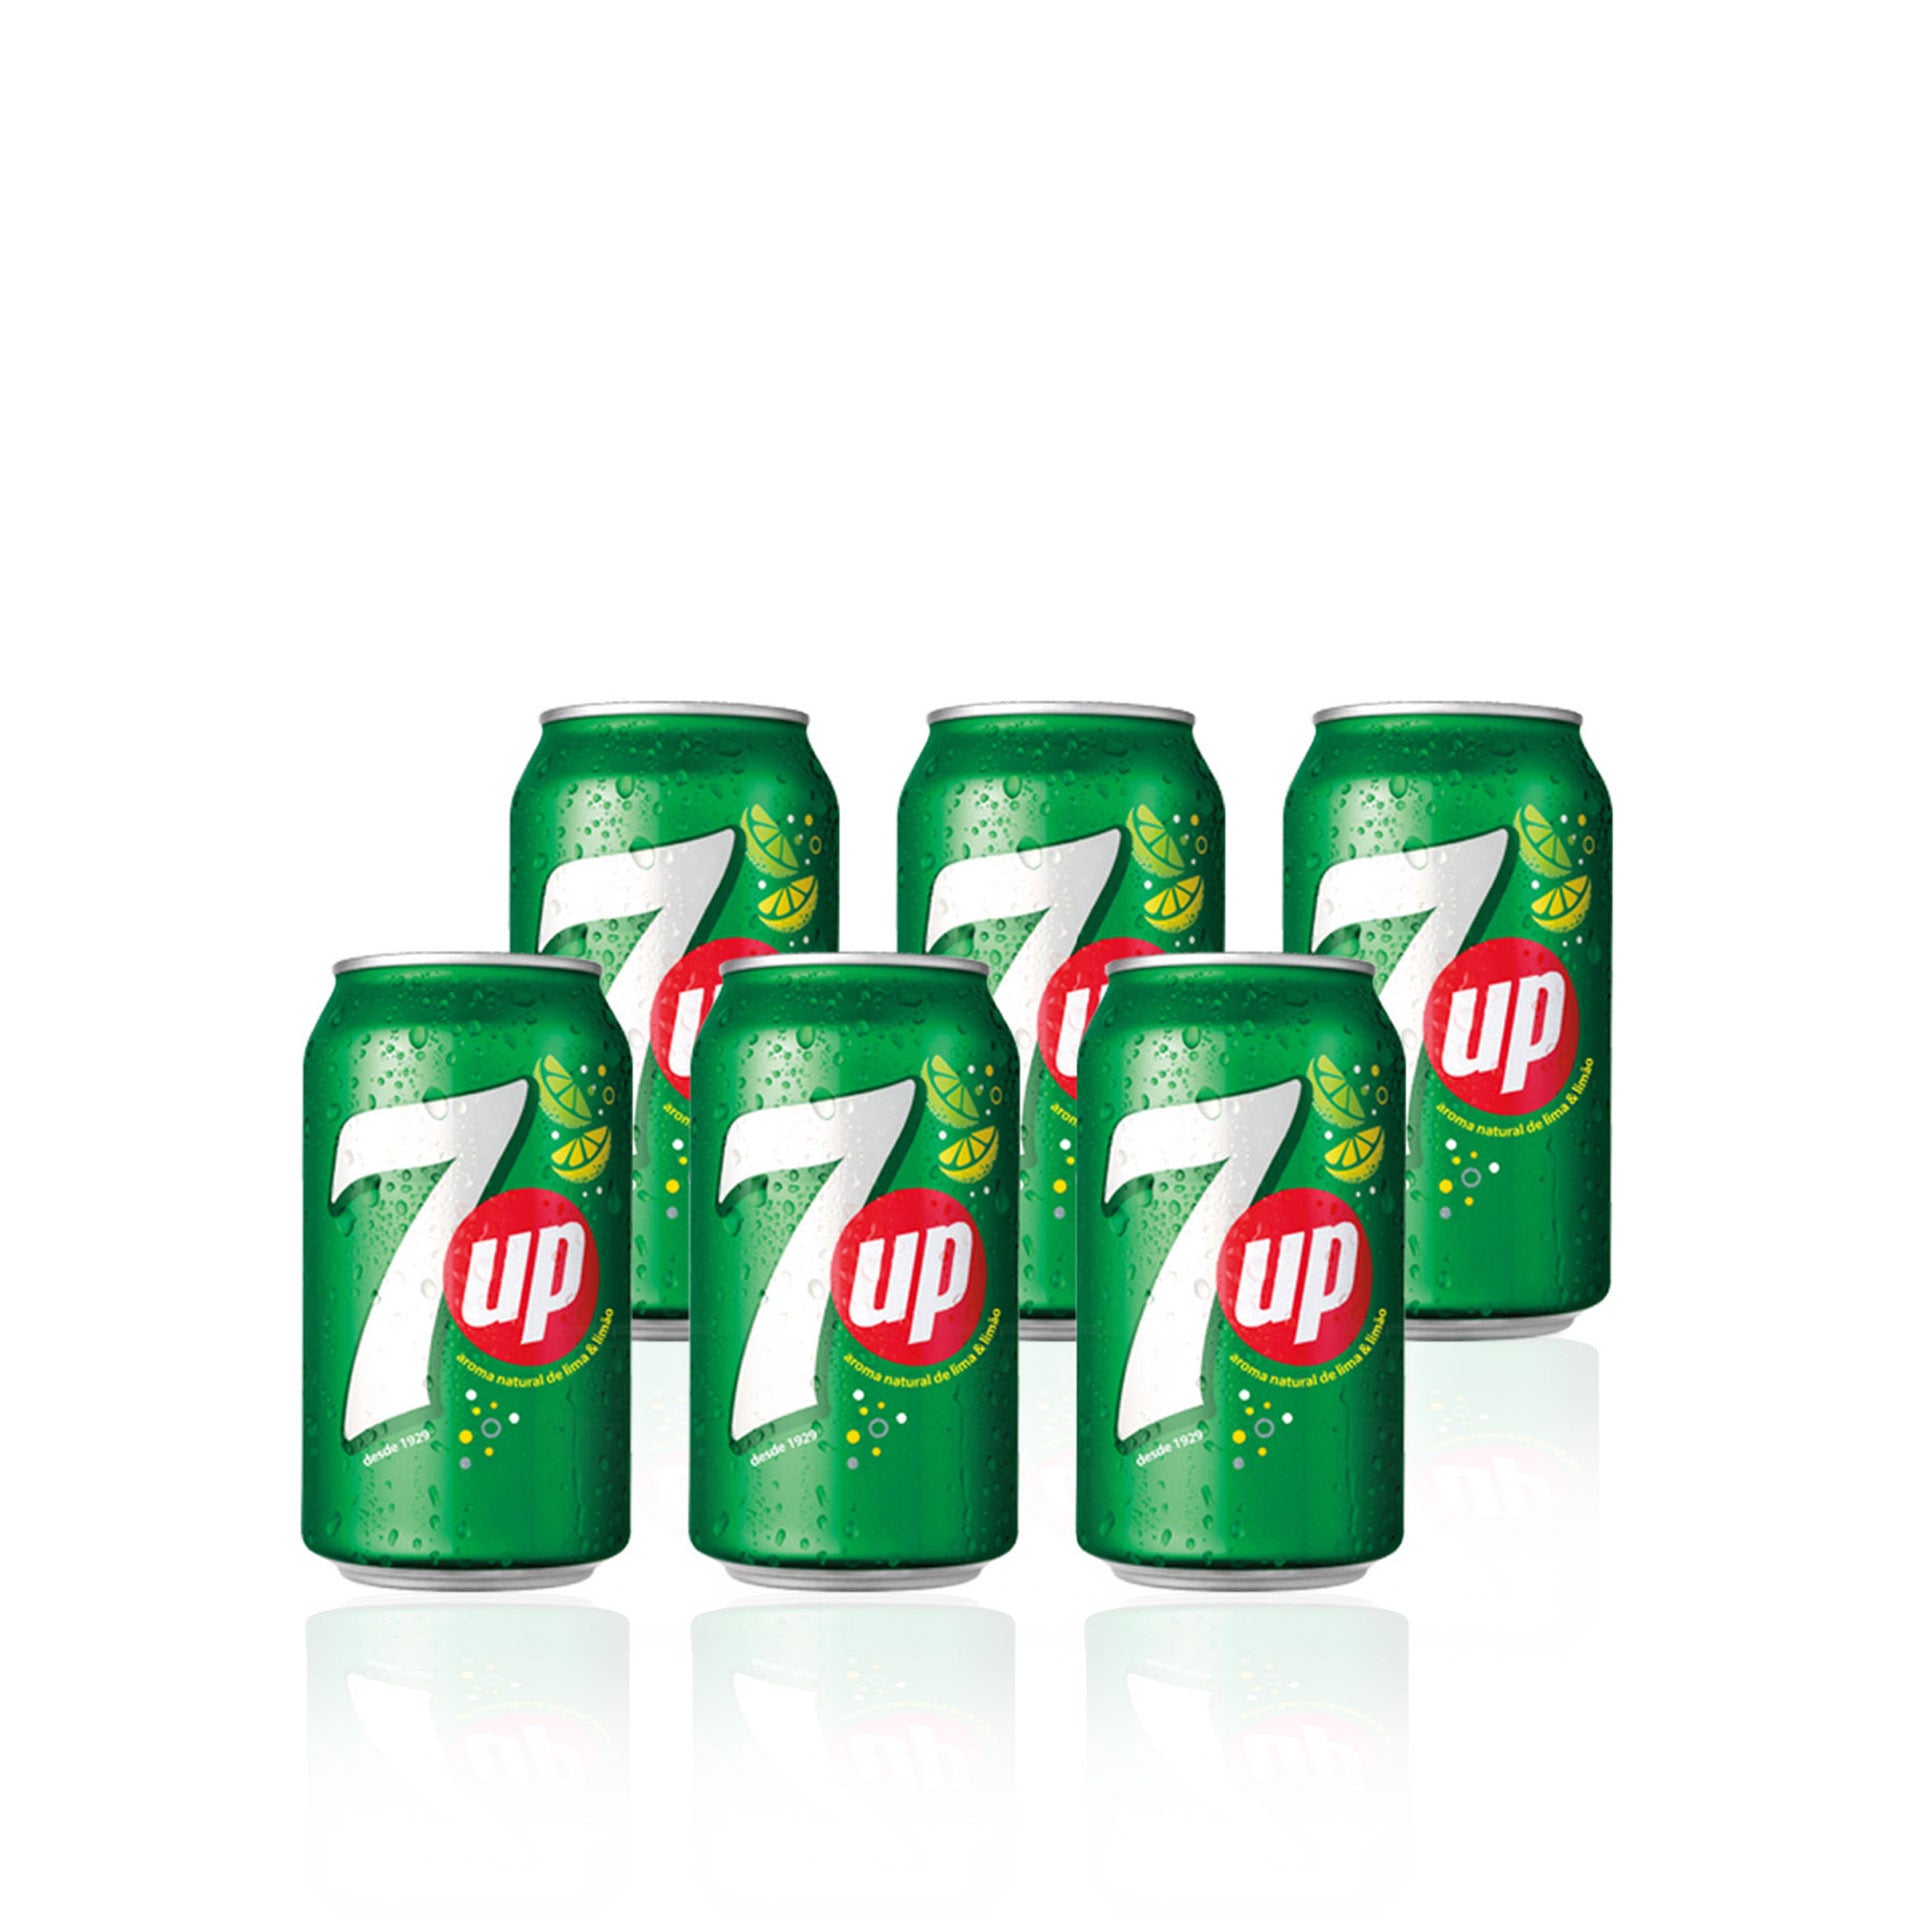 7UP Lata 33 cl - Pack 6 x 33 cl